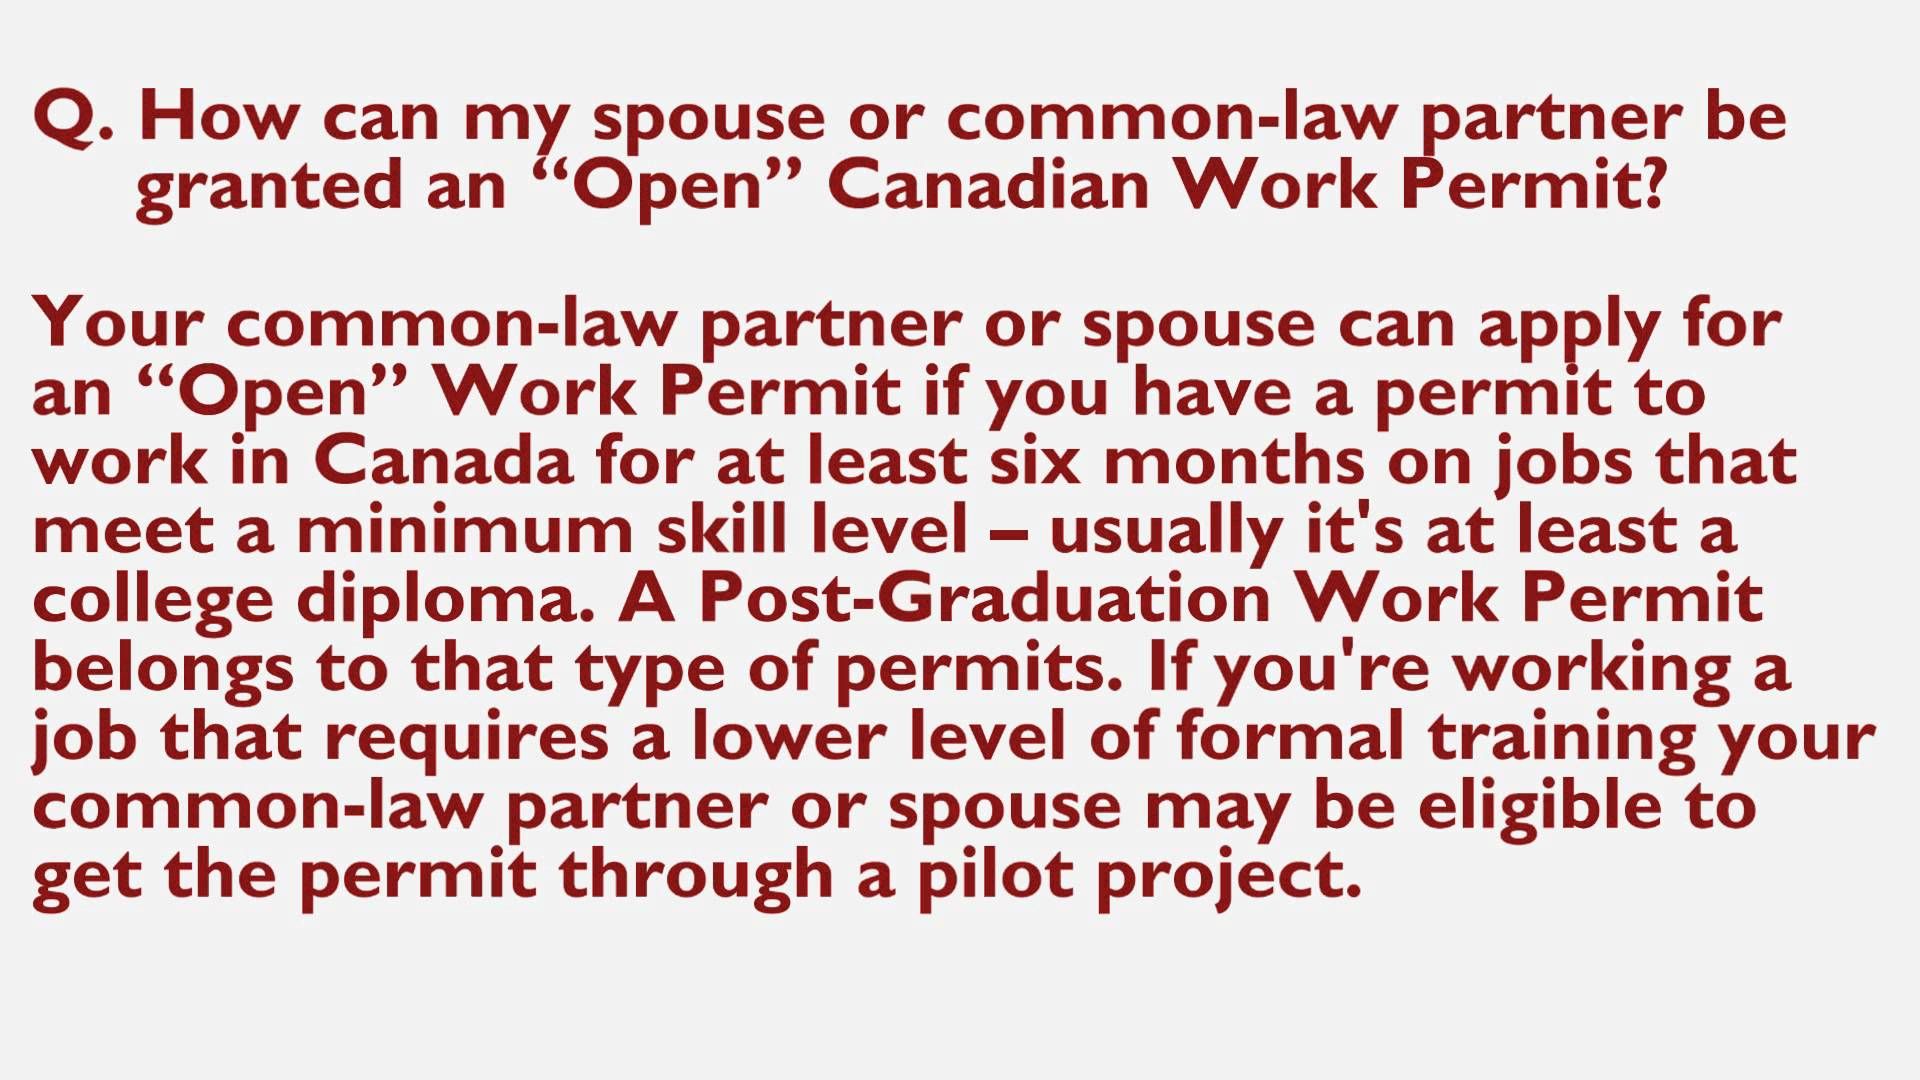 Canada extends open work permit for Spouses